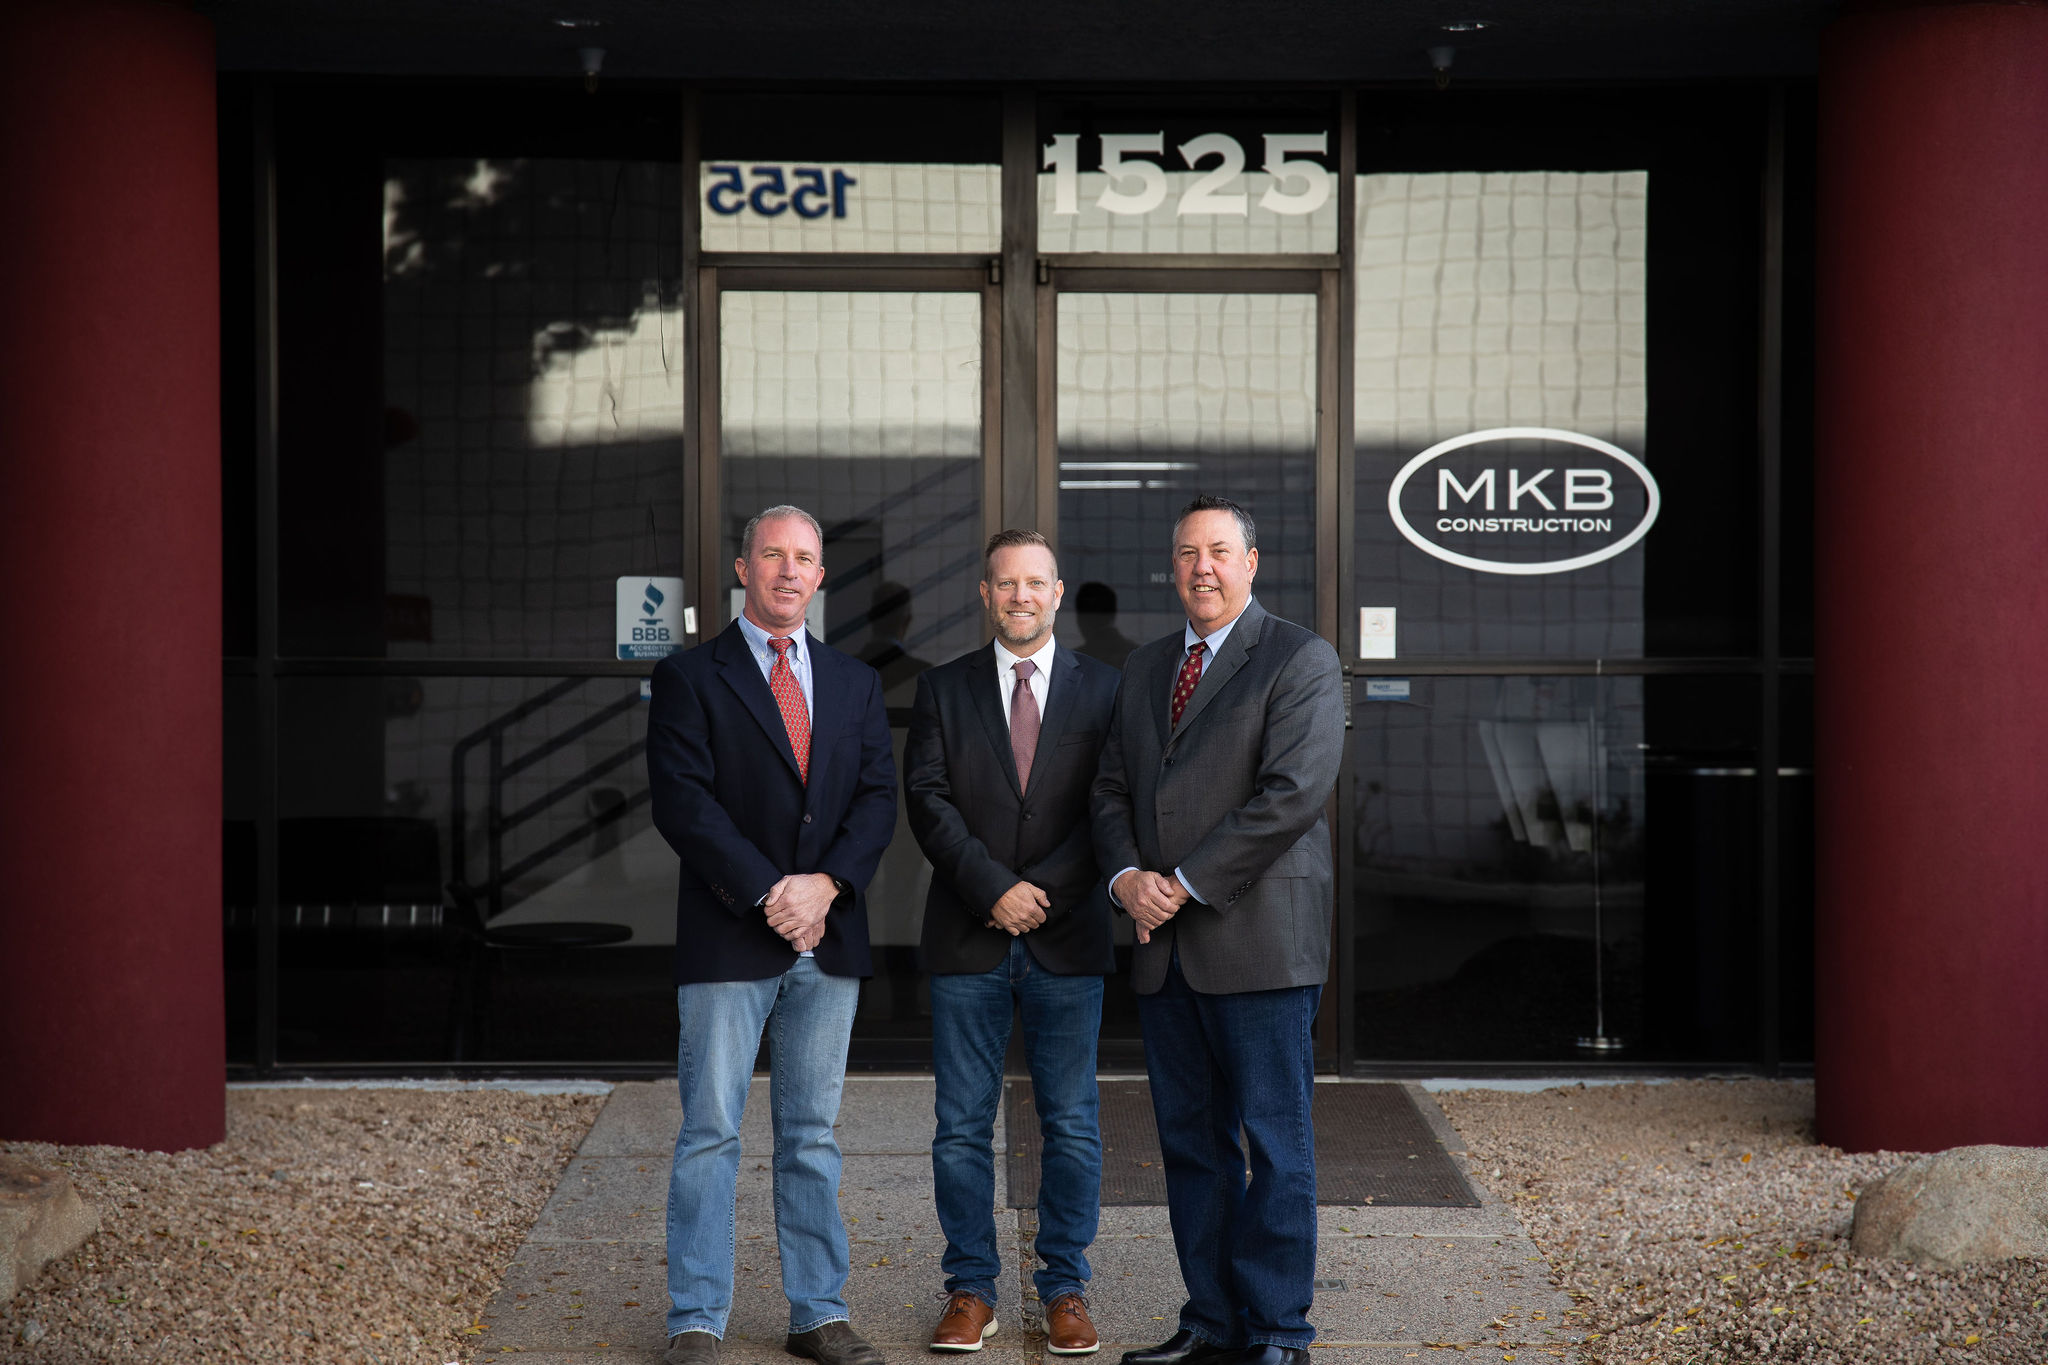 Three men from MKB Construction Inc. standing in front of a building, showcasing their quality services.